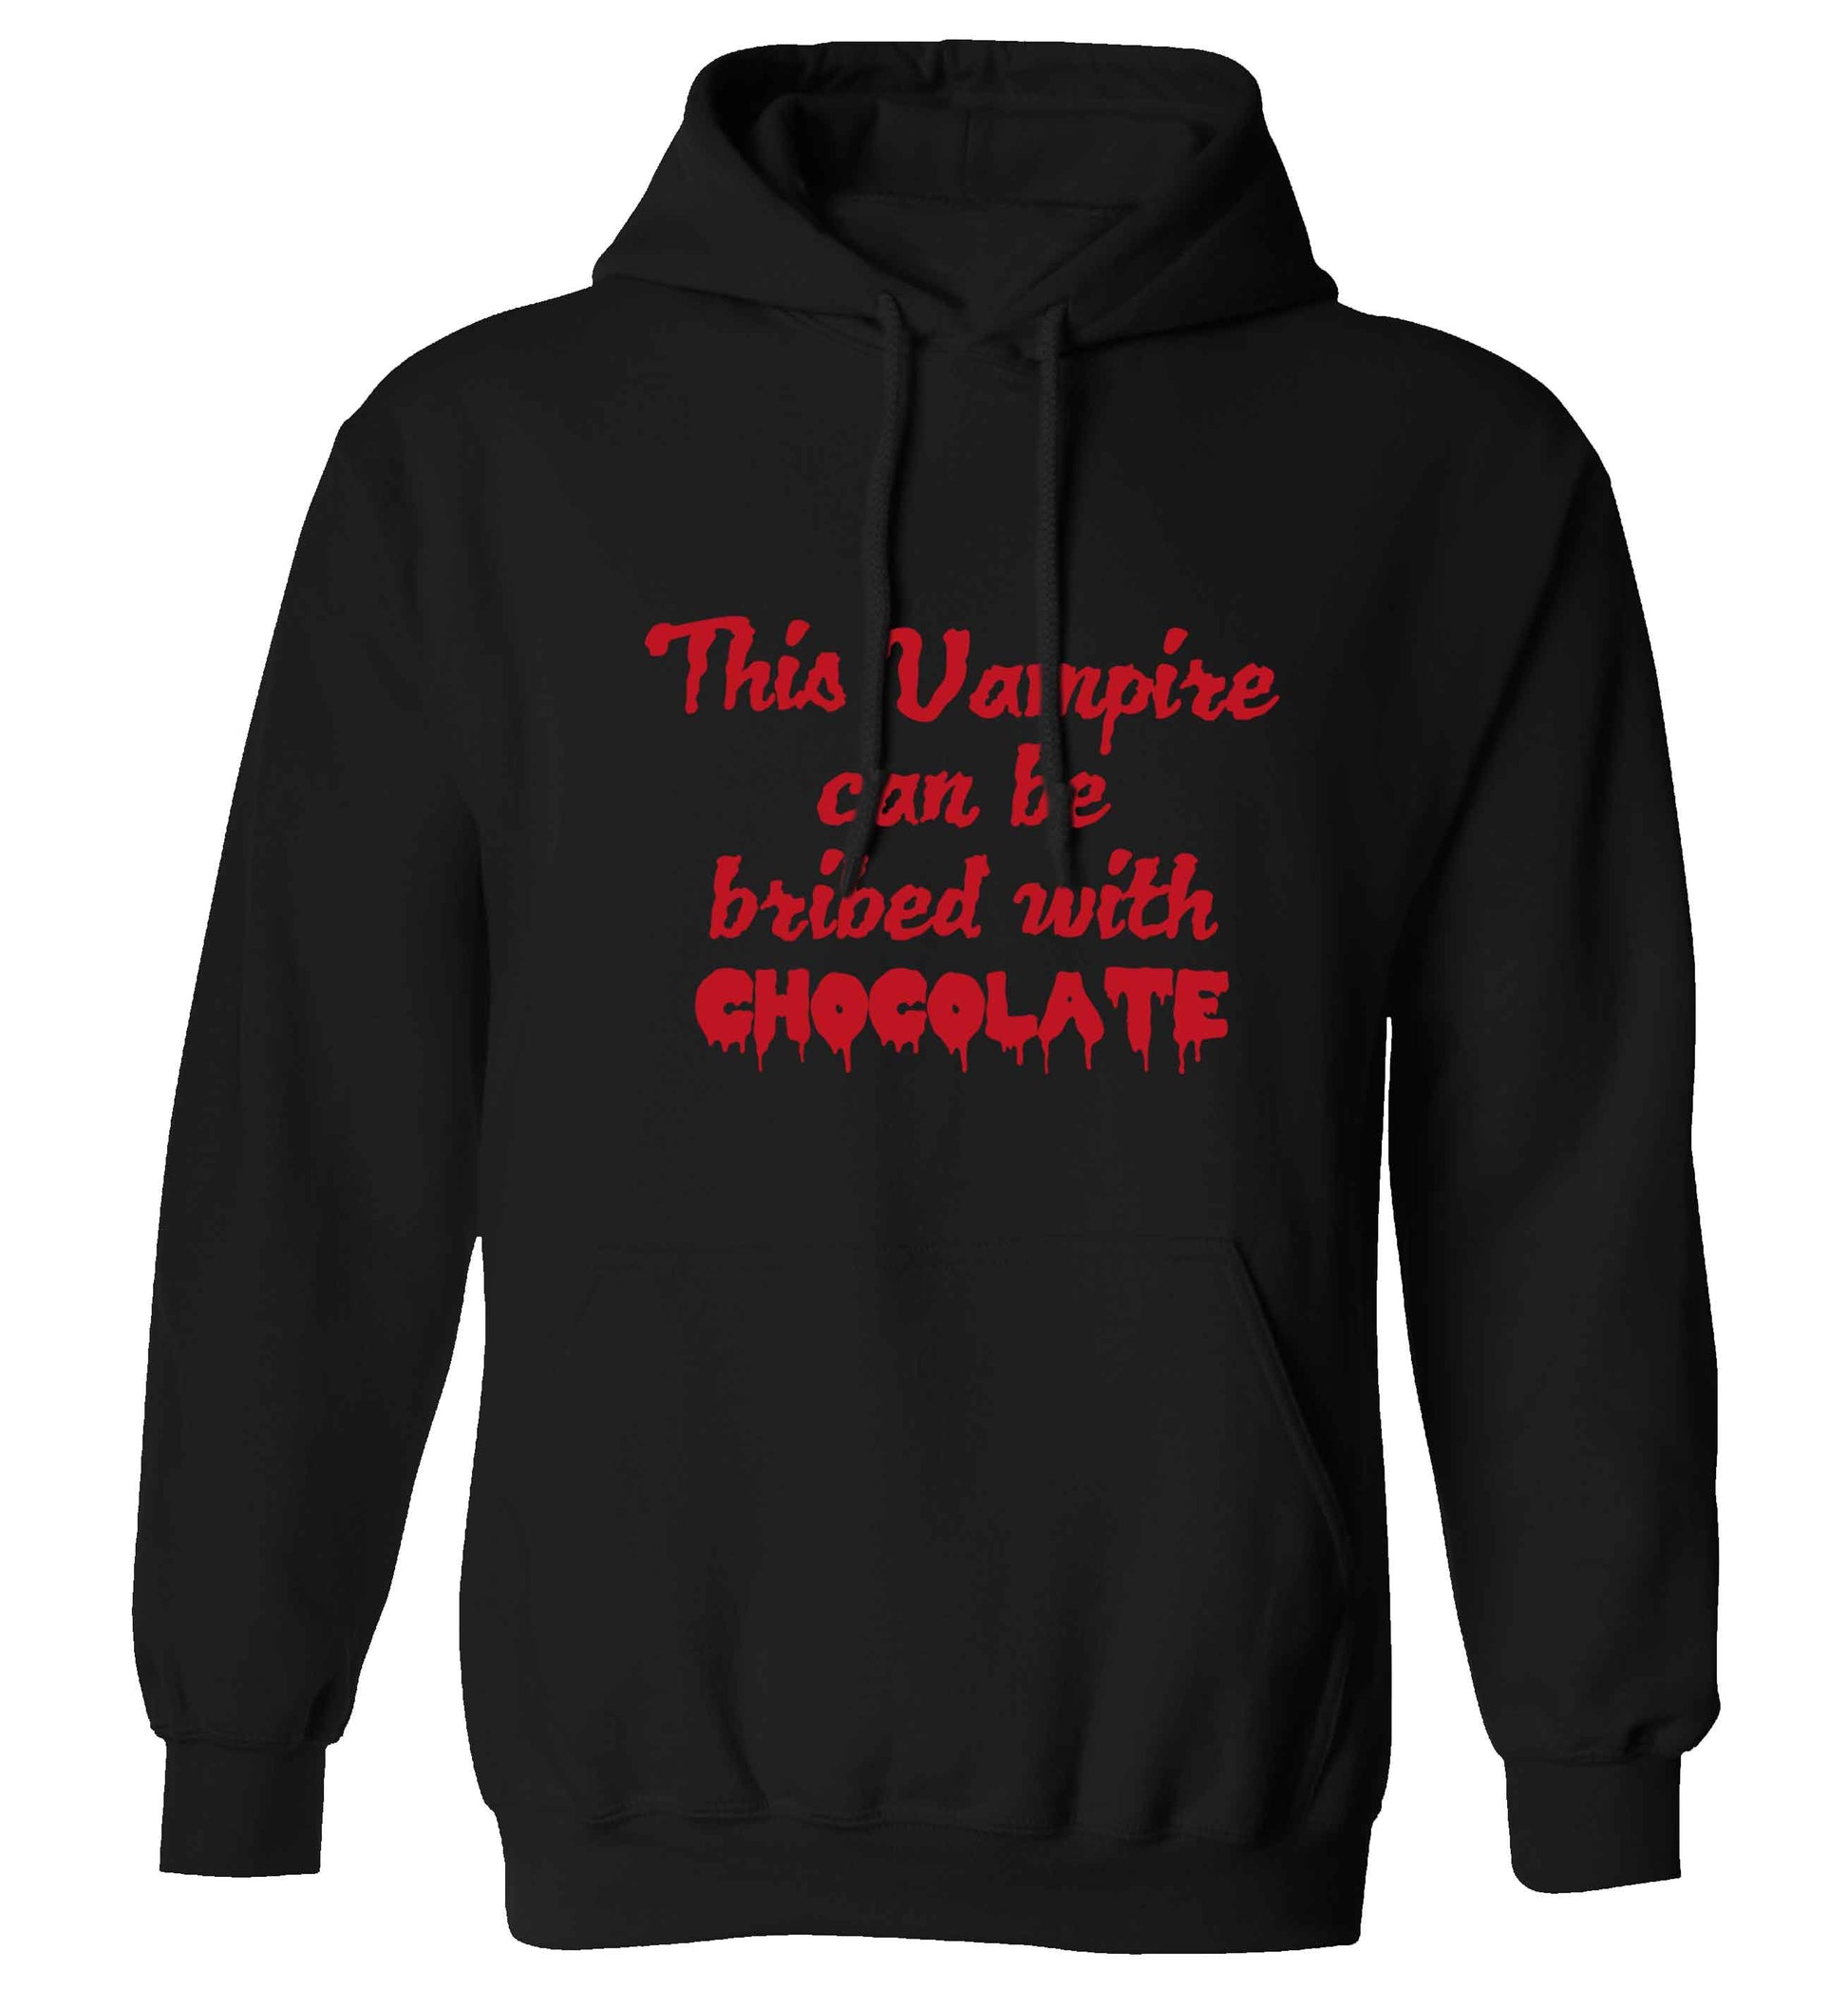 This vampire can be bribed with chocolate adults unisex black hoodie 2XL